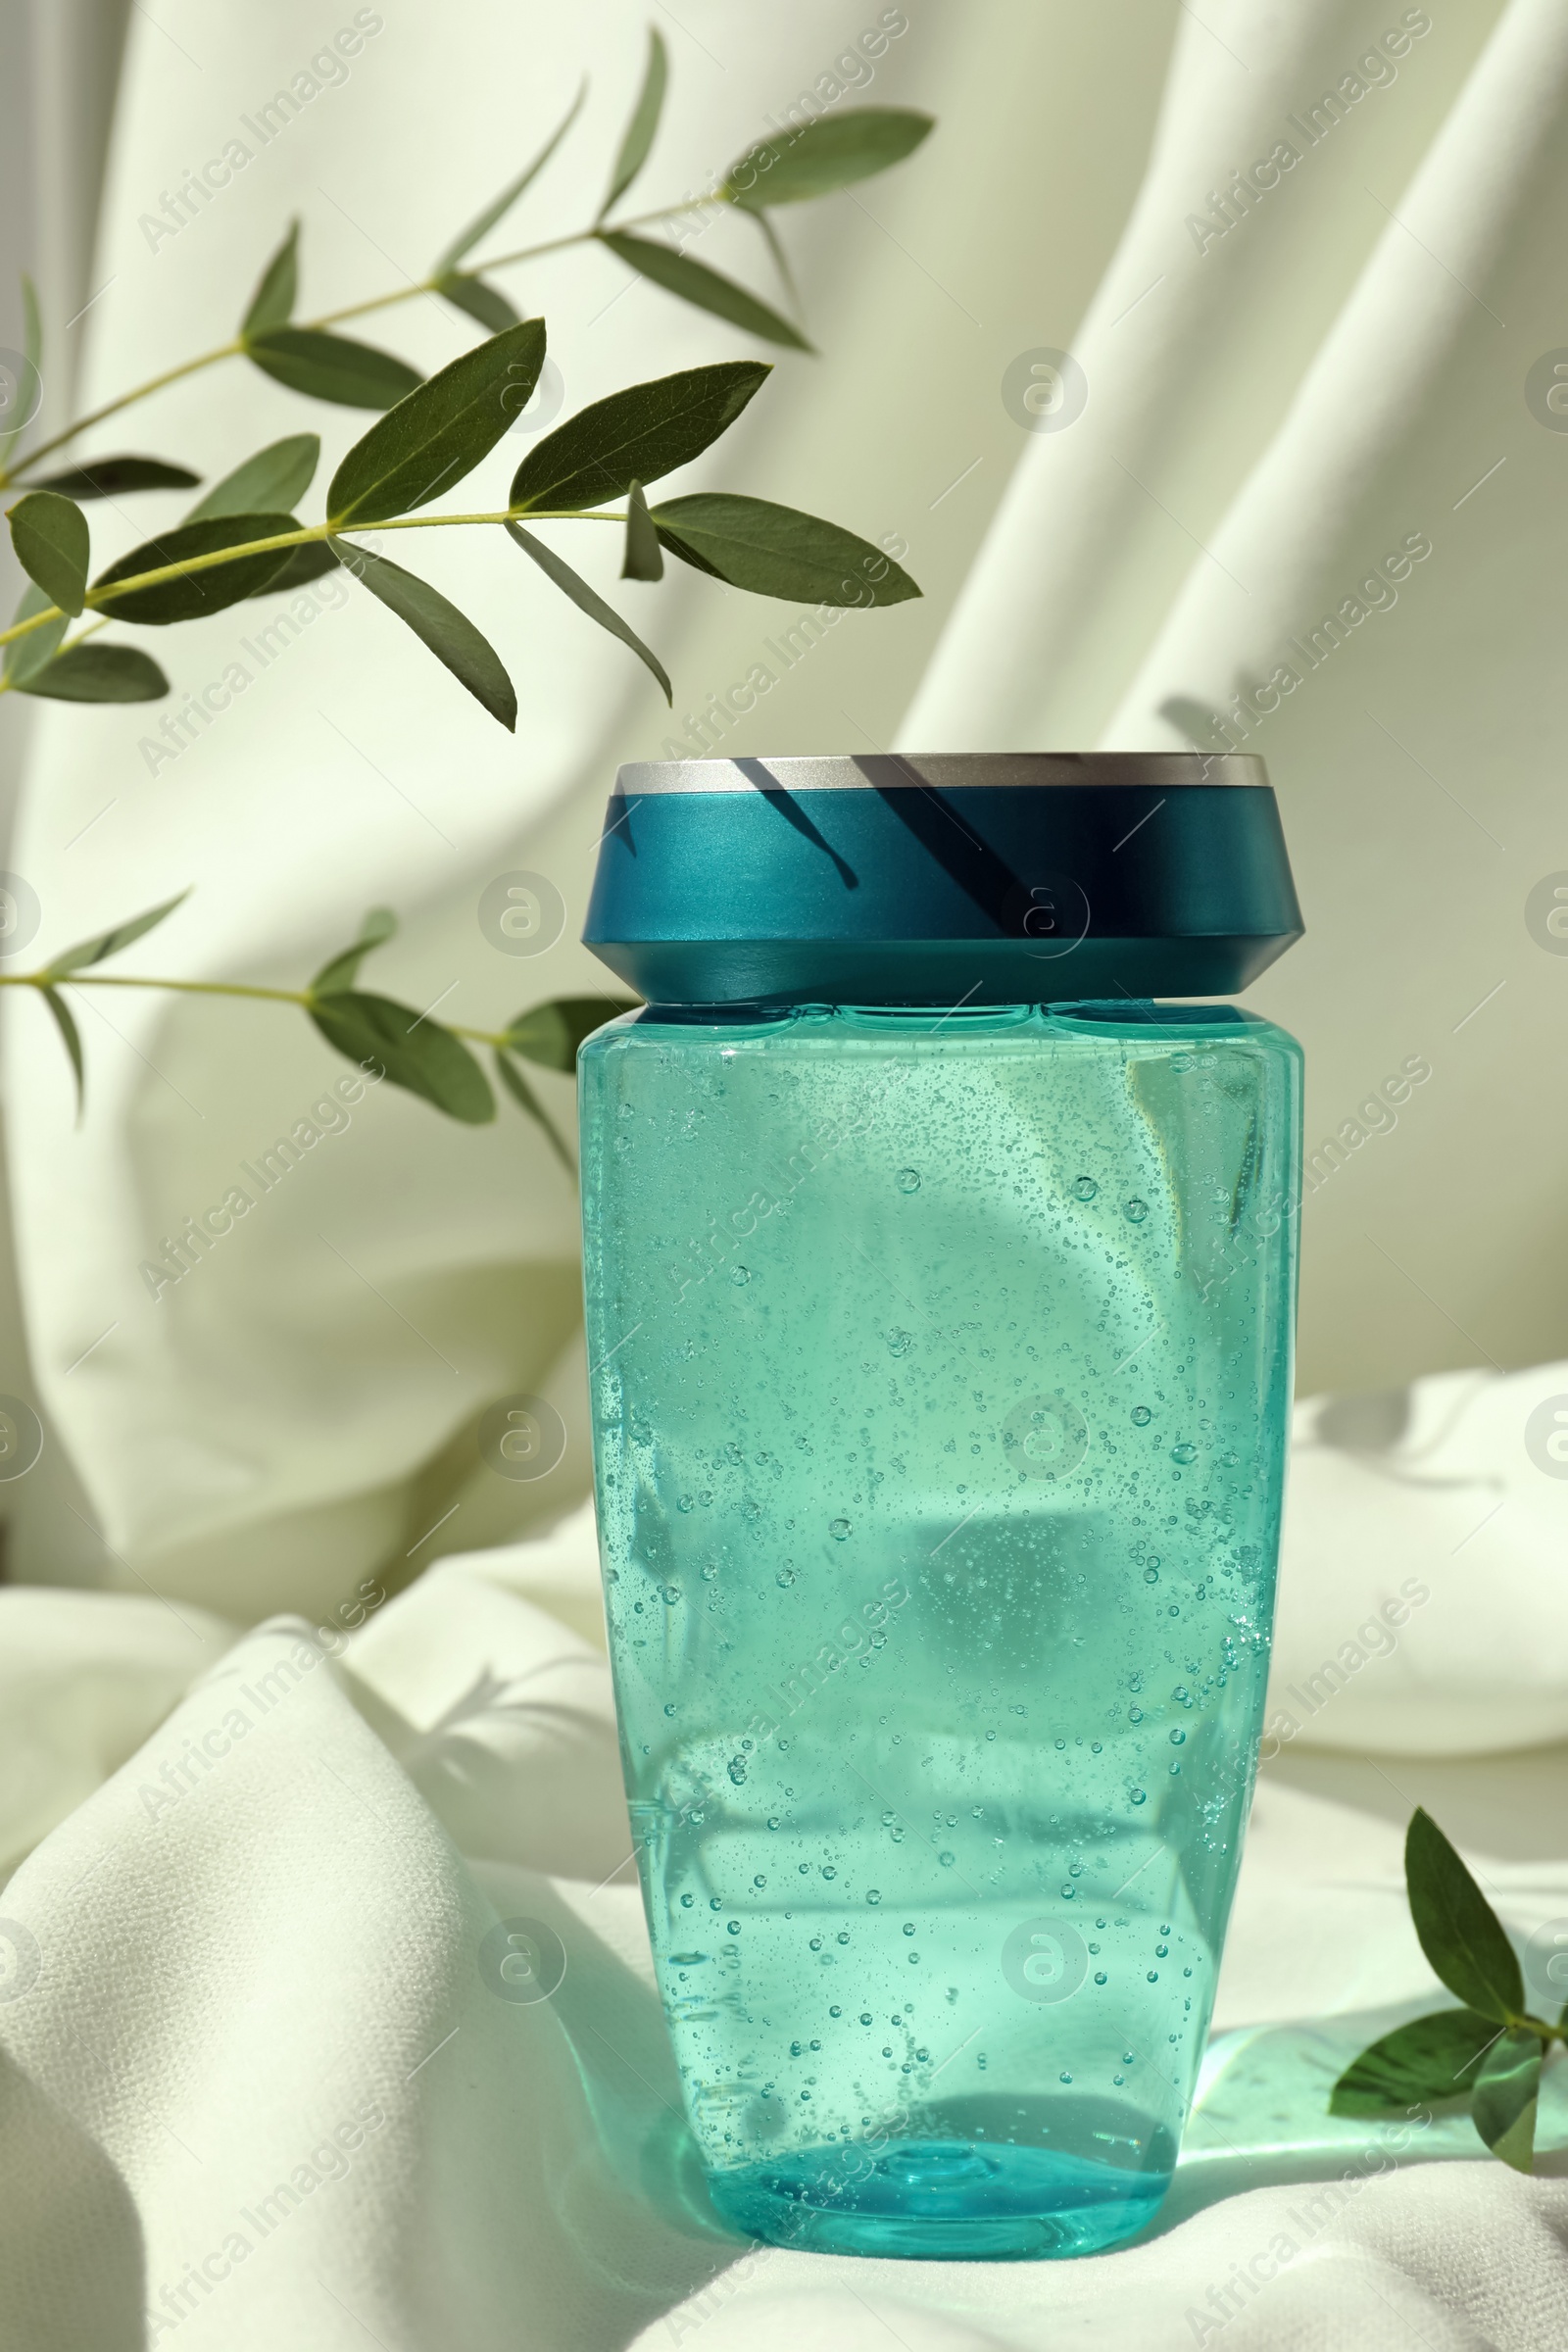 Photo of Bottle of hair care cosmetic product and green leaves on light fabric